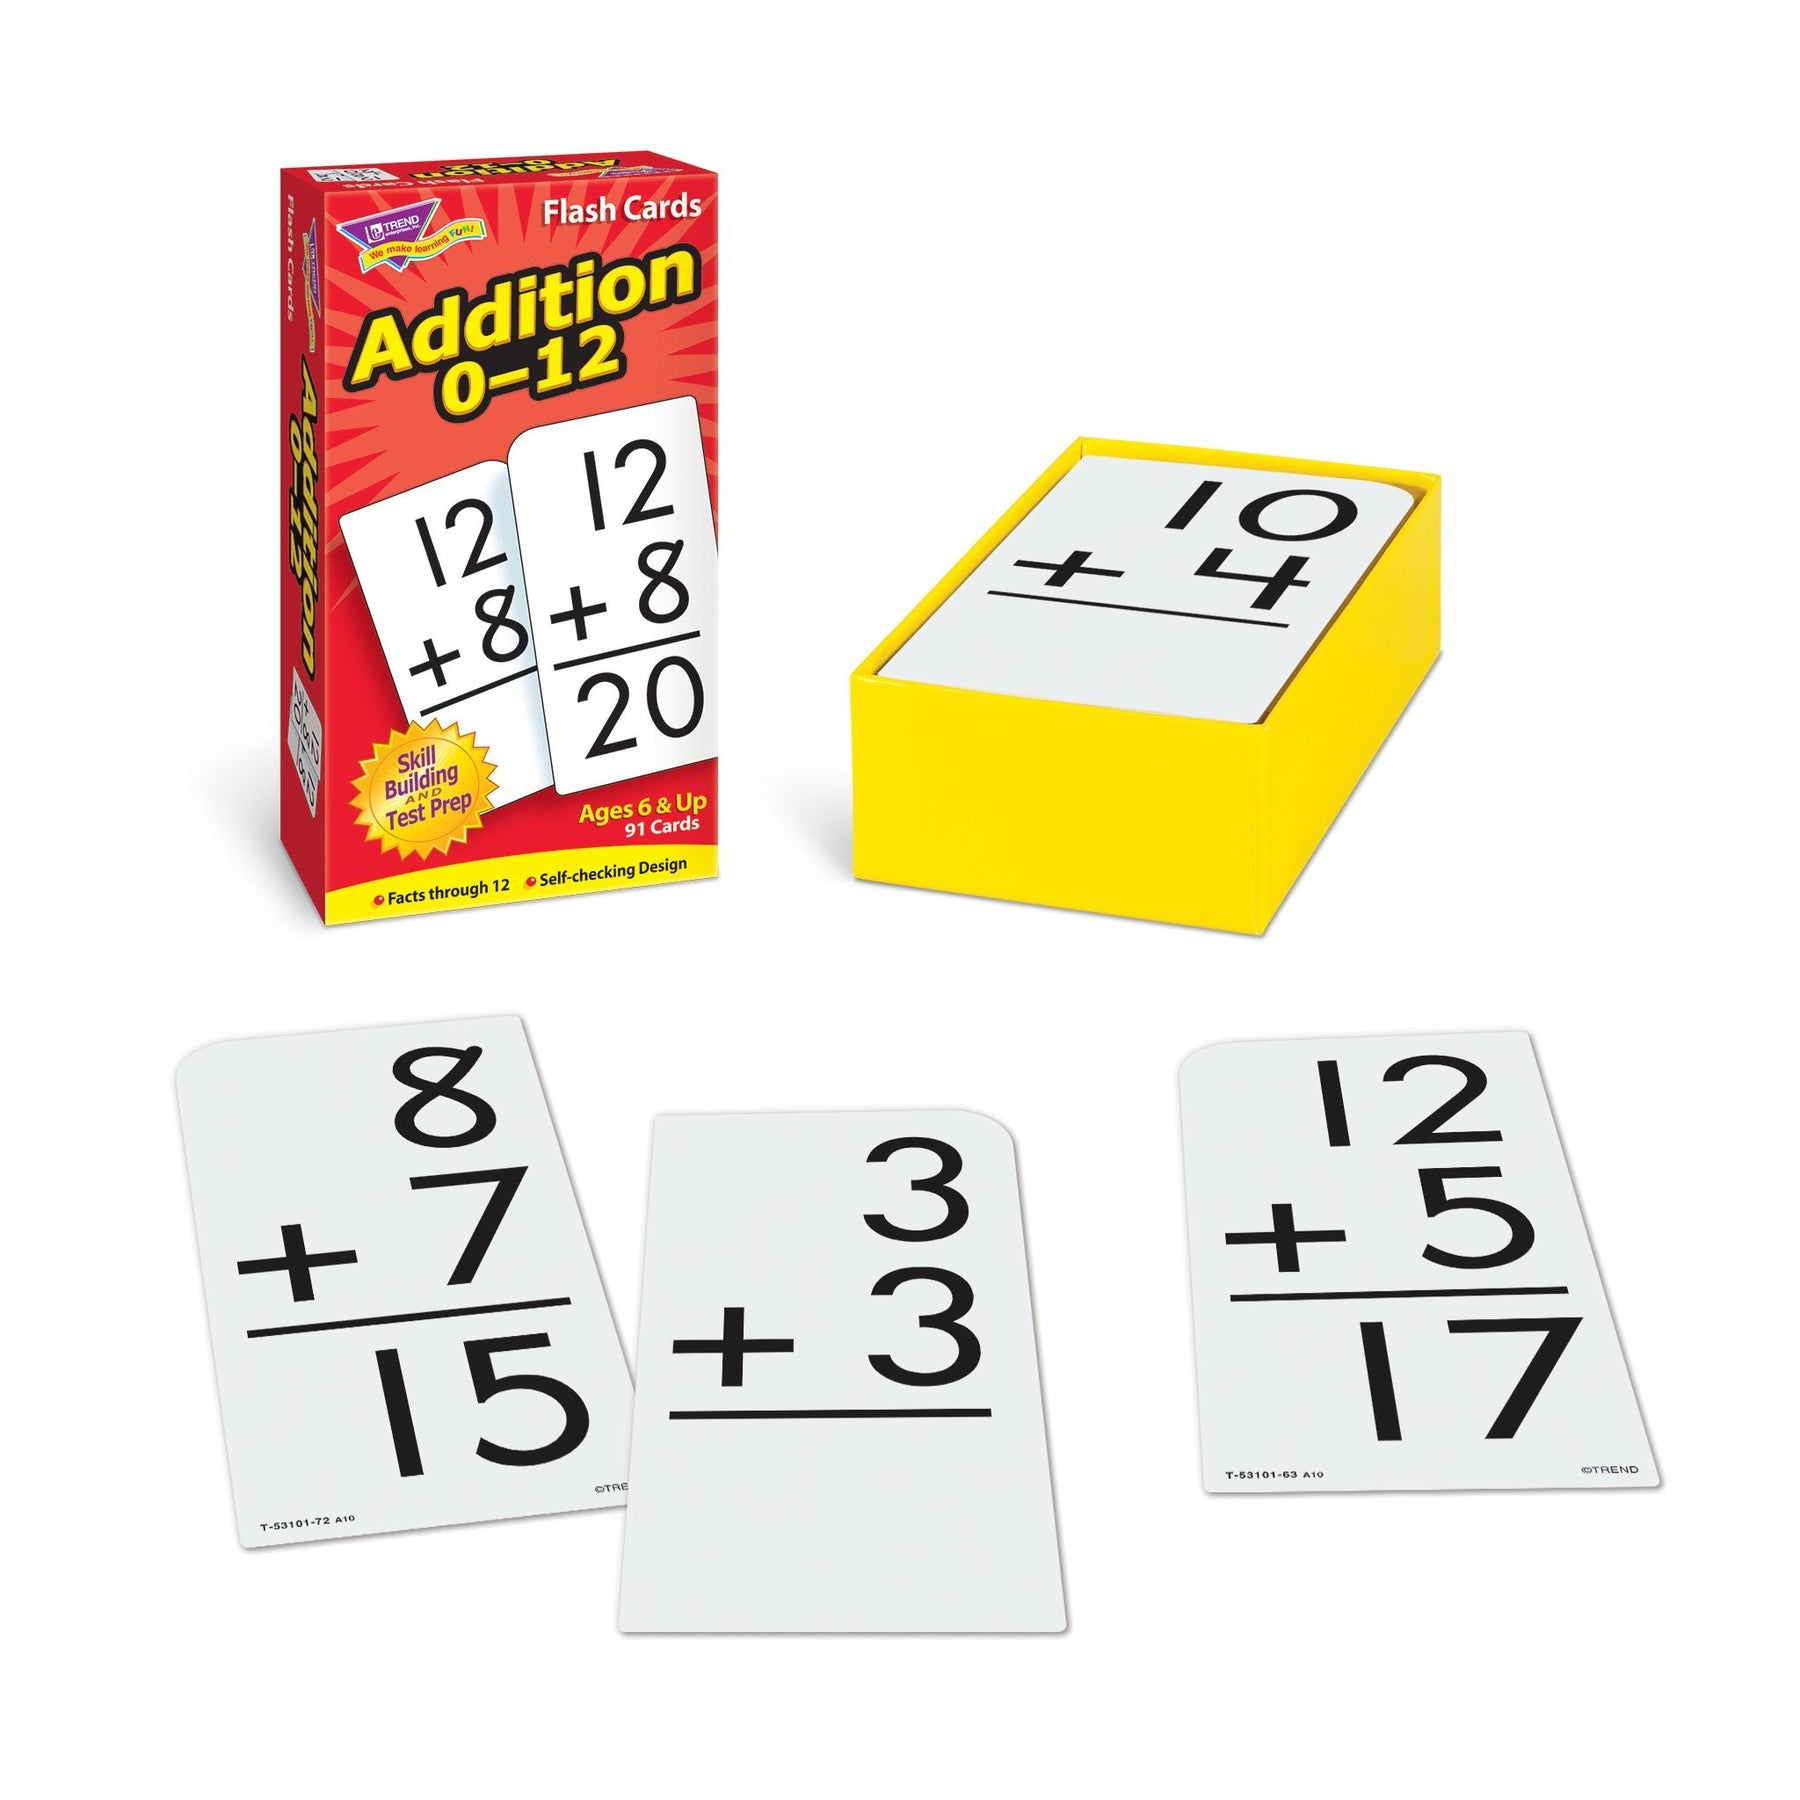 Addition Flash Cards Full Box Set - All Facts 0-12